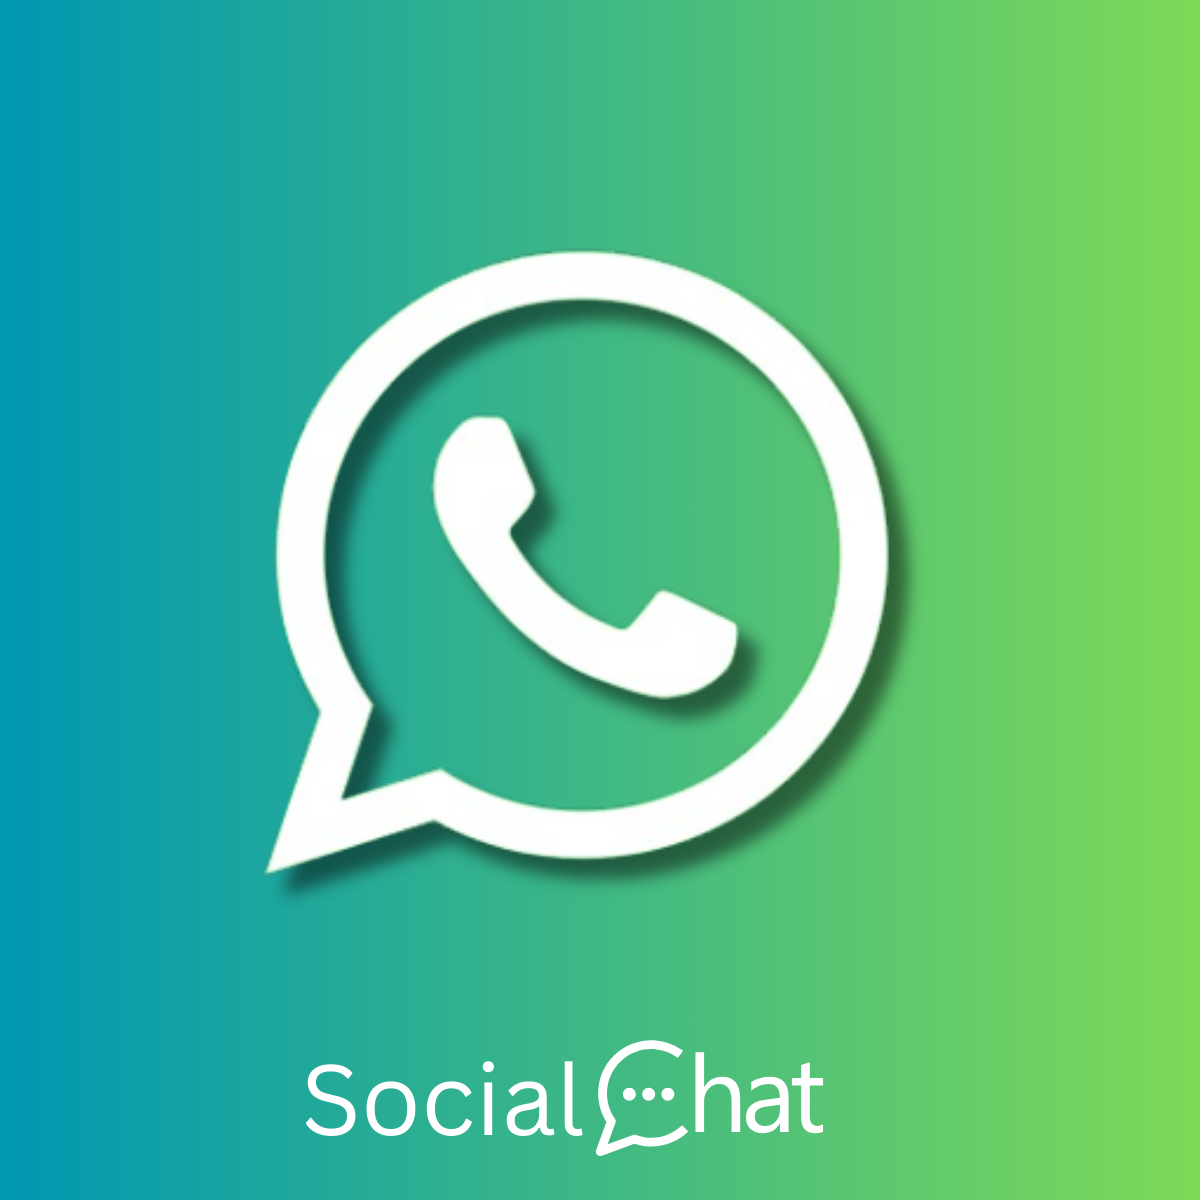 Whatsapp Chat by SC